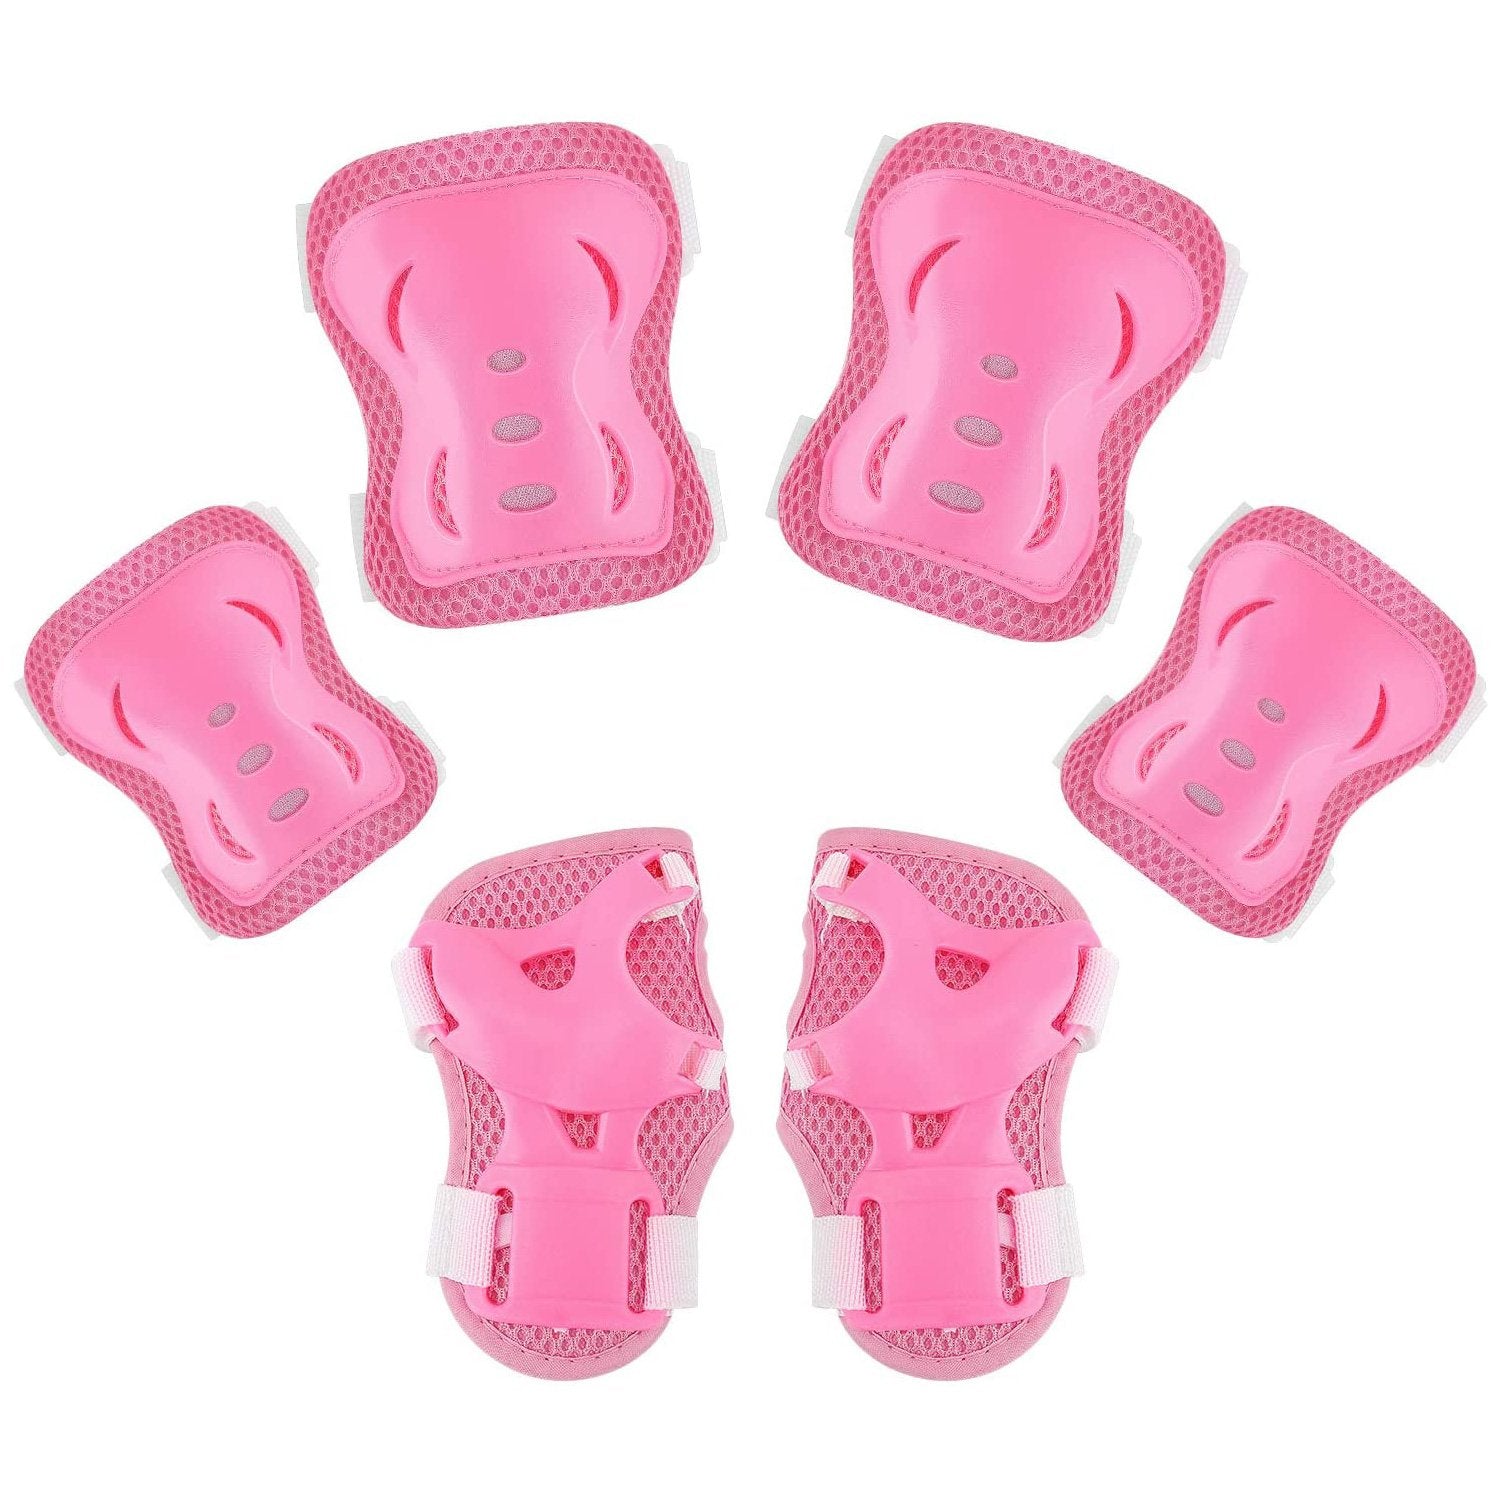 Spartan Knee & Elbow Pads and Wrist Protective Set - Pink – Spartanbikes